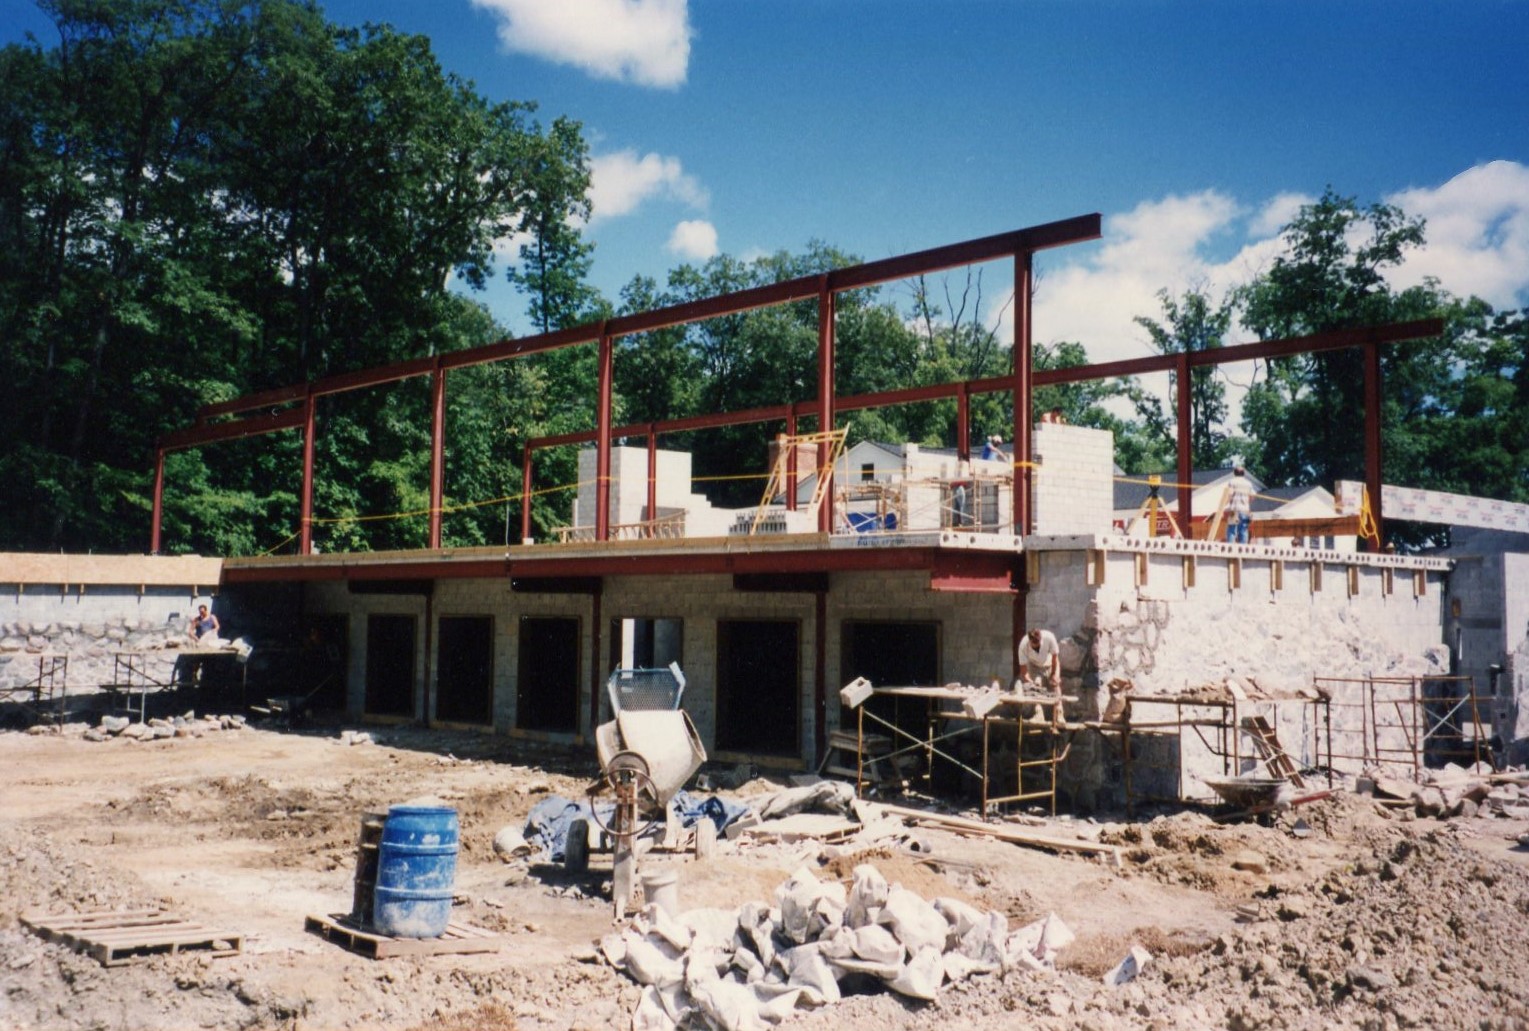 the library building under construction